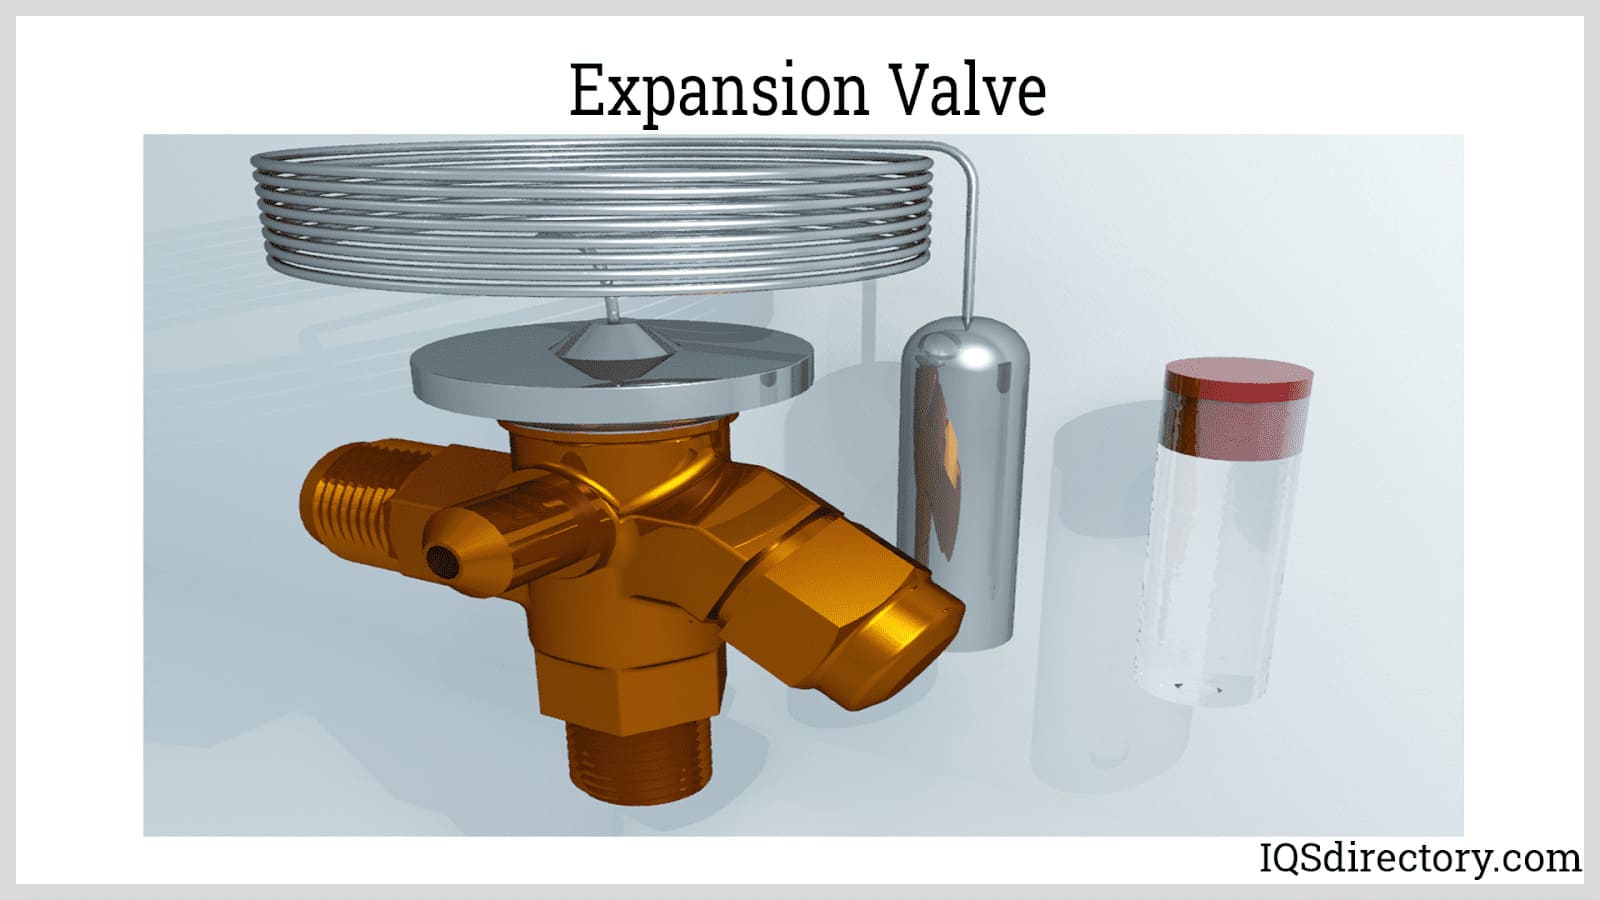 https://www.iqsdirectory.com/articles/chiller/water-chiller/expansion-valve.jpg